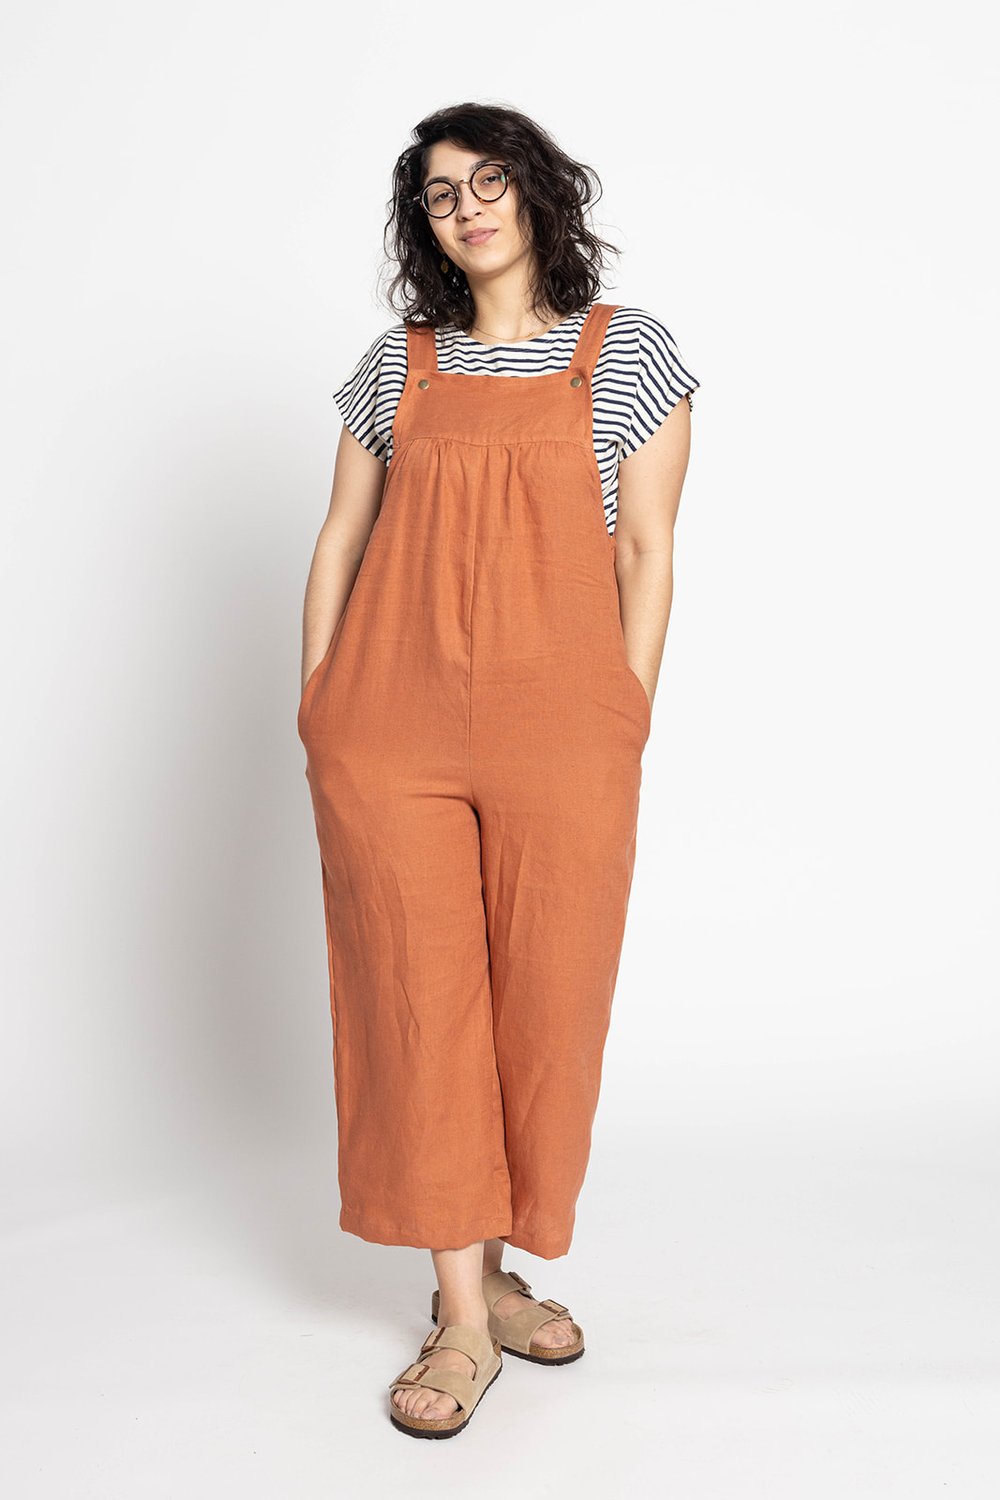 Sophie is wearing M overalls and a S top. Her measurements are: Height 5'8" | Bust 36" | Waist 29" | Hip 43.5"